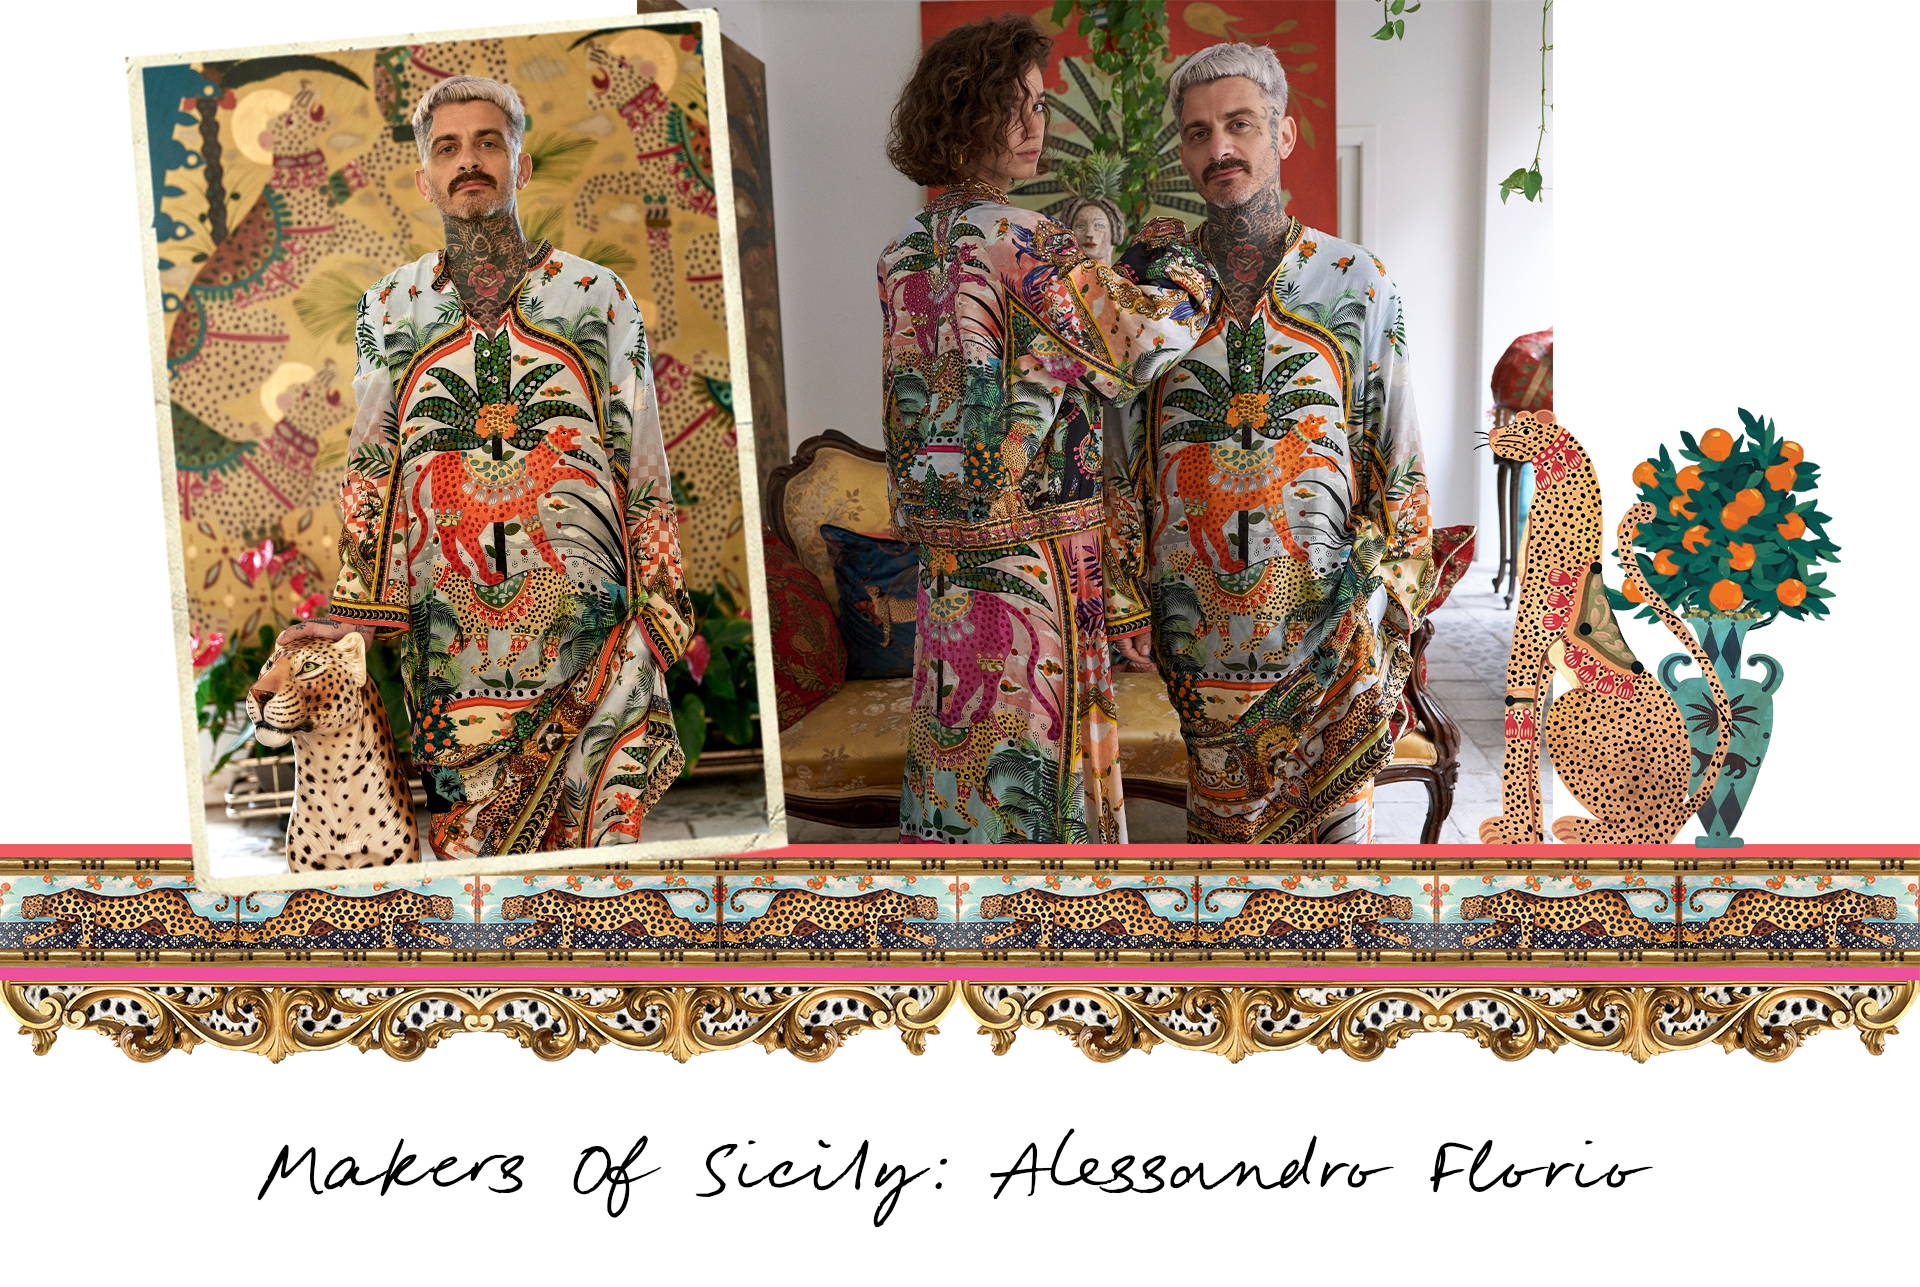 Makers of Sicily: Alessandro Florio